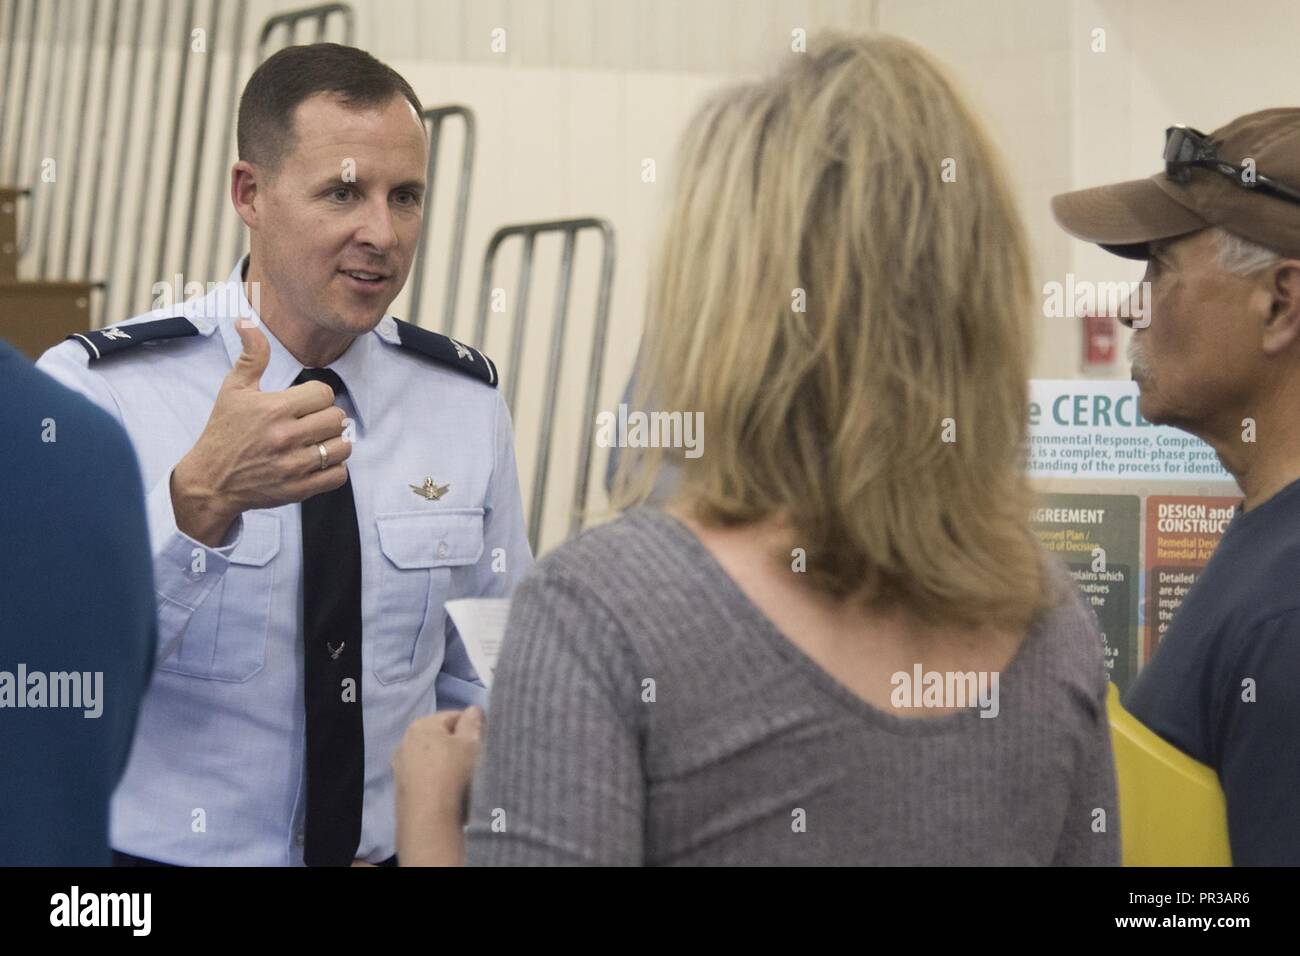 FOUNTAIN, Colo. - Col. Todd Moore, 21st Space Wing commander, answers Colorado Springs community members’ questions during an open house at Janitell Junior High School, July 25, 2017, Fountain, Colo. The open house was one of several AFCEC and 21st SW community engagements discussing the site inspection report released earlier that day covering an update on the perfluorooctane sulfonate and perfluorooctanoic acid contamination. They also met with key state and federal members during a closed-door meeting followed with a media roundtable and the open house. Stock Photo